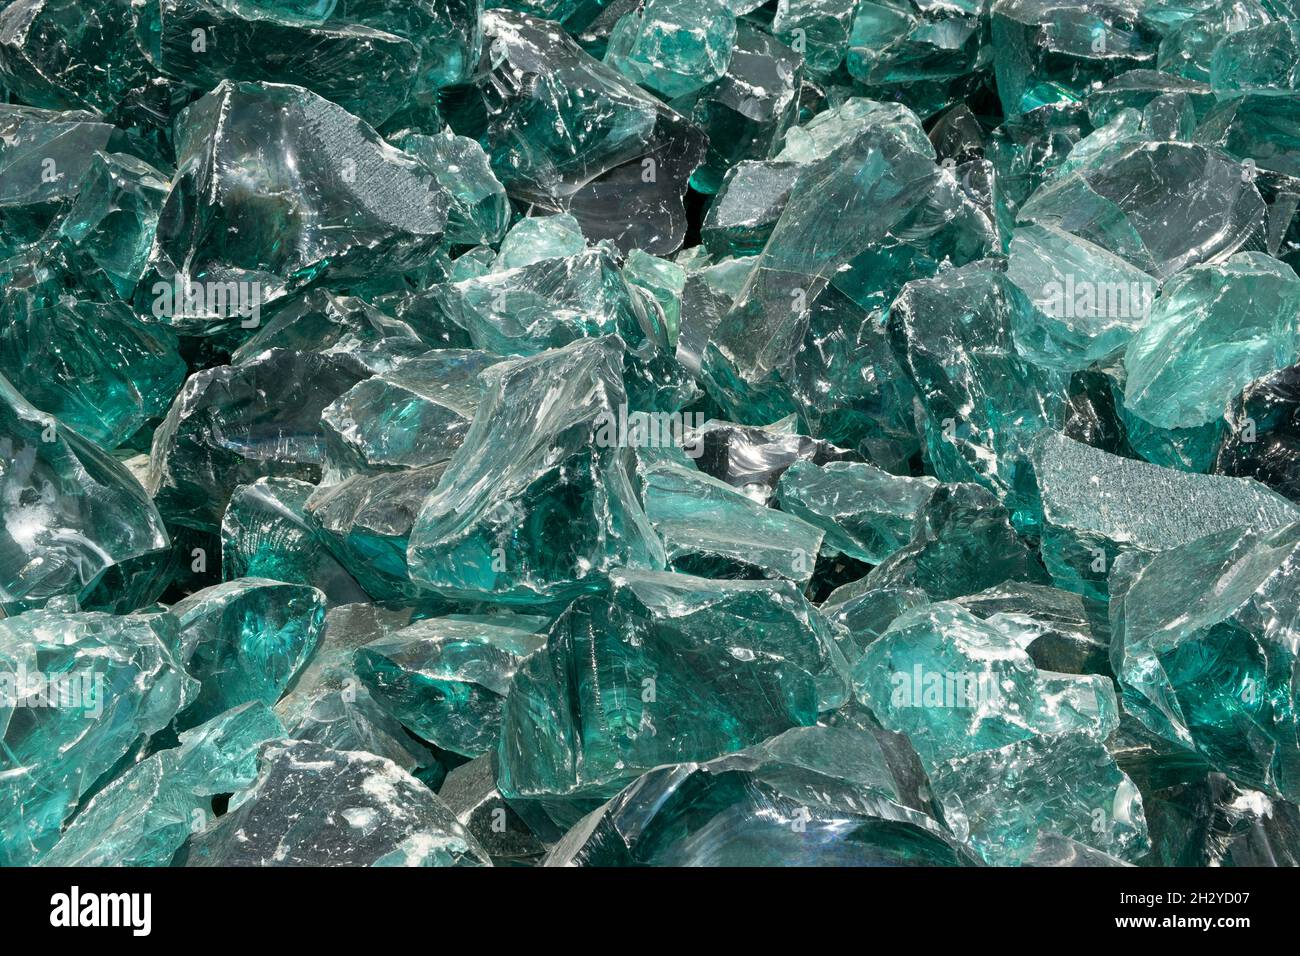 large Chunk of Aqua Glass Rock Slag for Garden decor. Glass in Nature Full frame texture top view Stock Photo